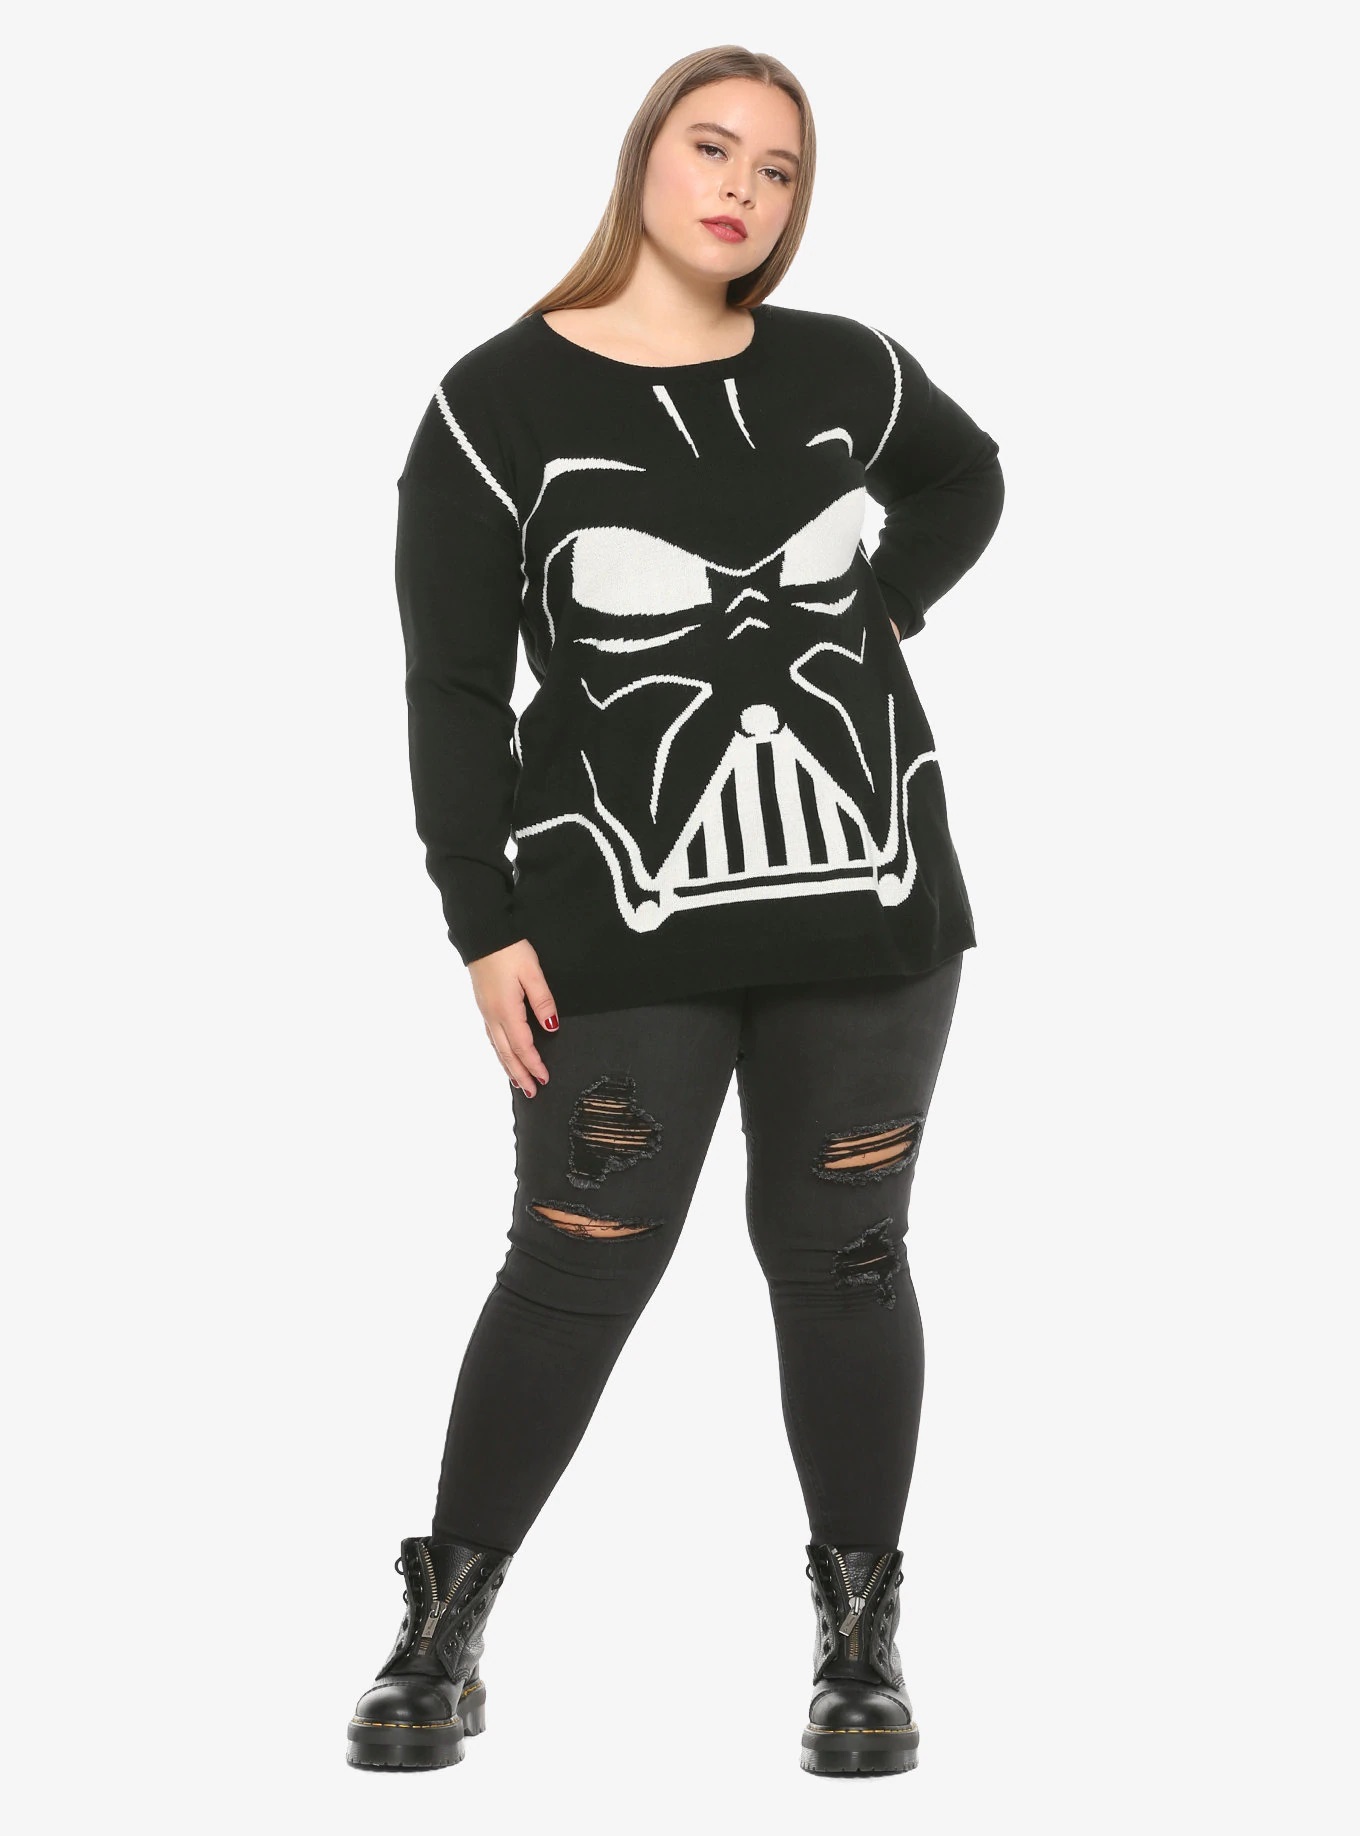 Women's Her Universe x Star Wars Darth Vader Sweater at Hot Topic